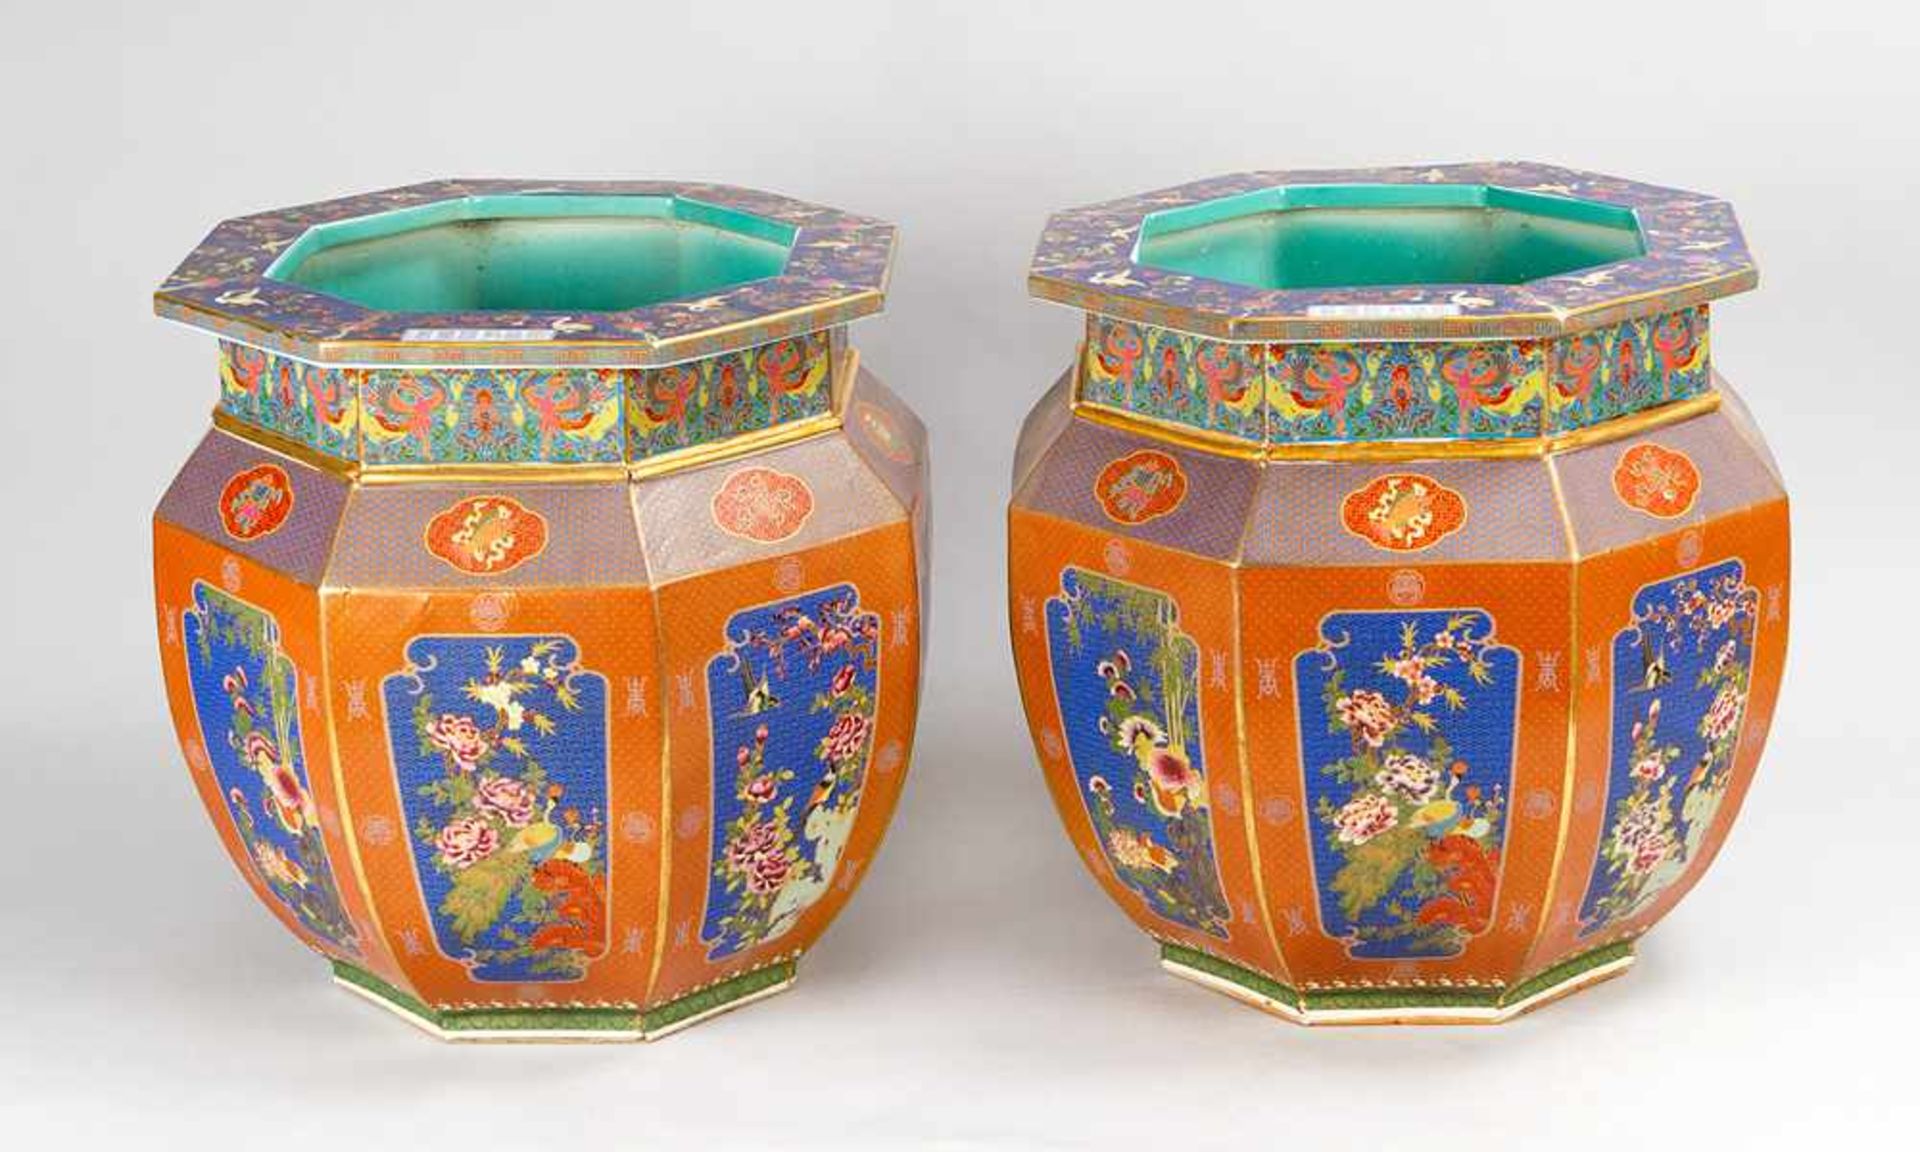 Pair of Chinese Bowls, porcelain in octagonal shape, thin neck with painted fields of dragons and